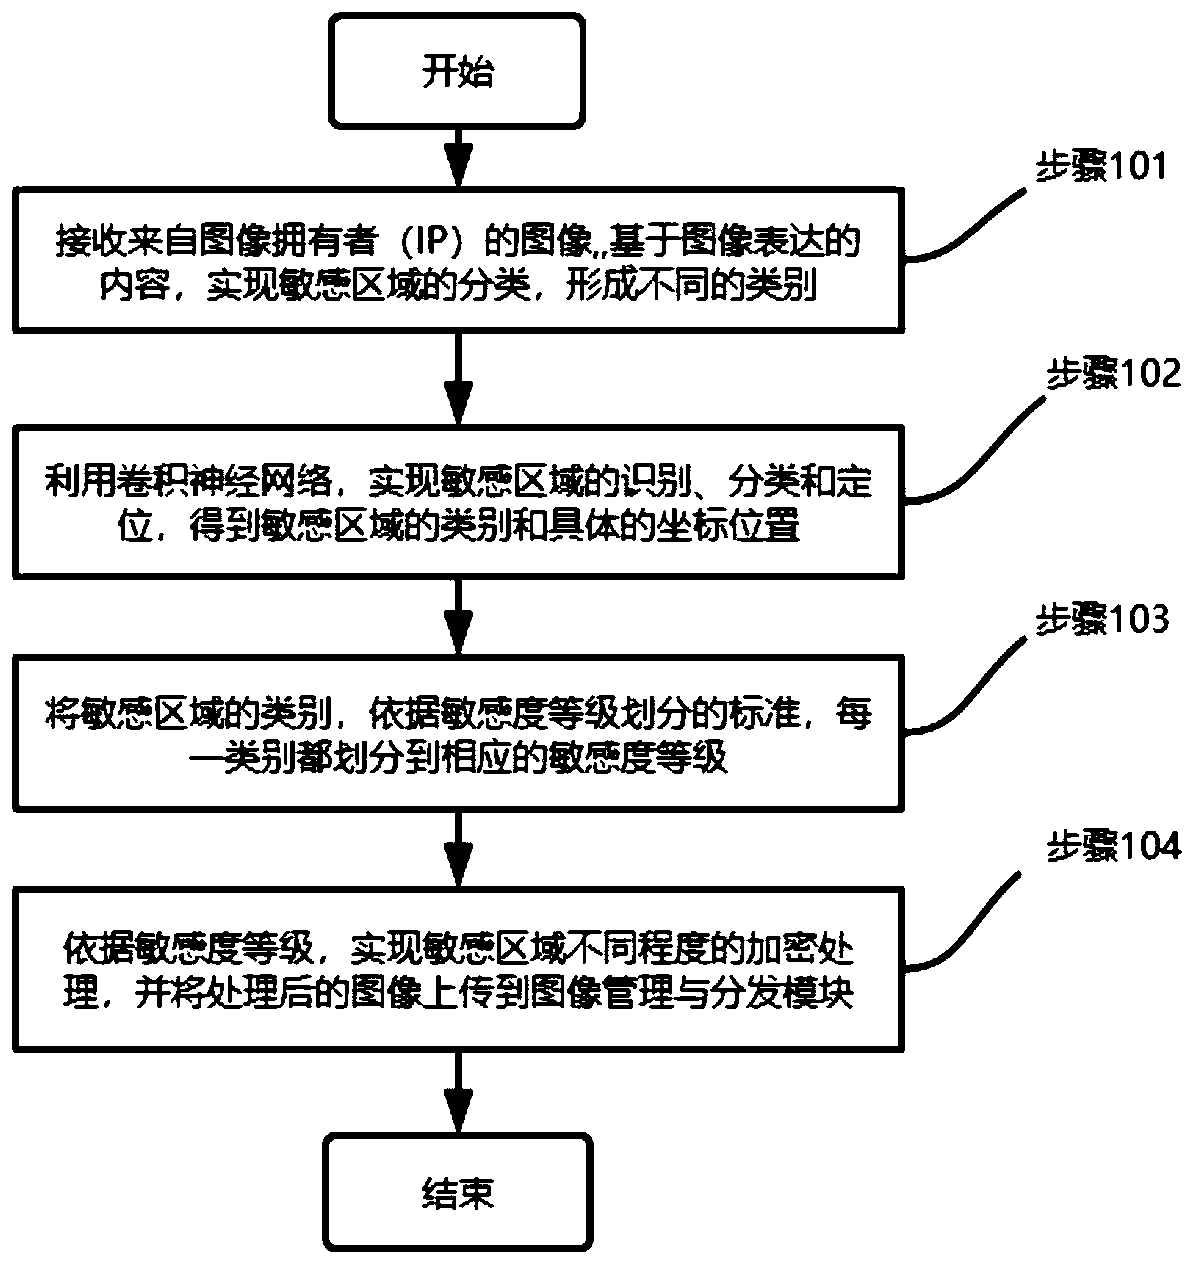 Access control method based on image recognition and user level